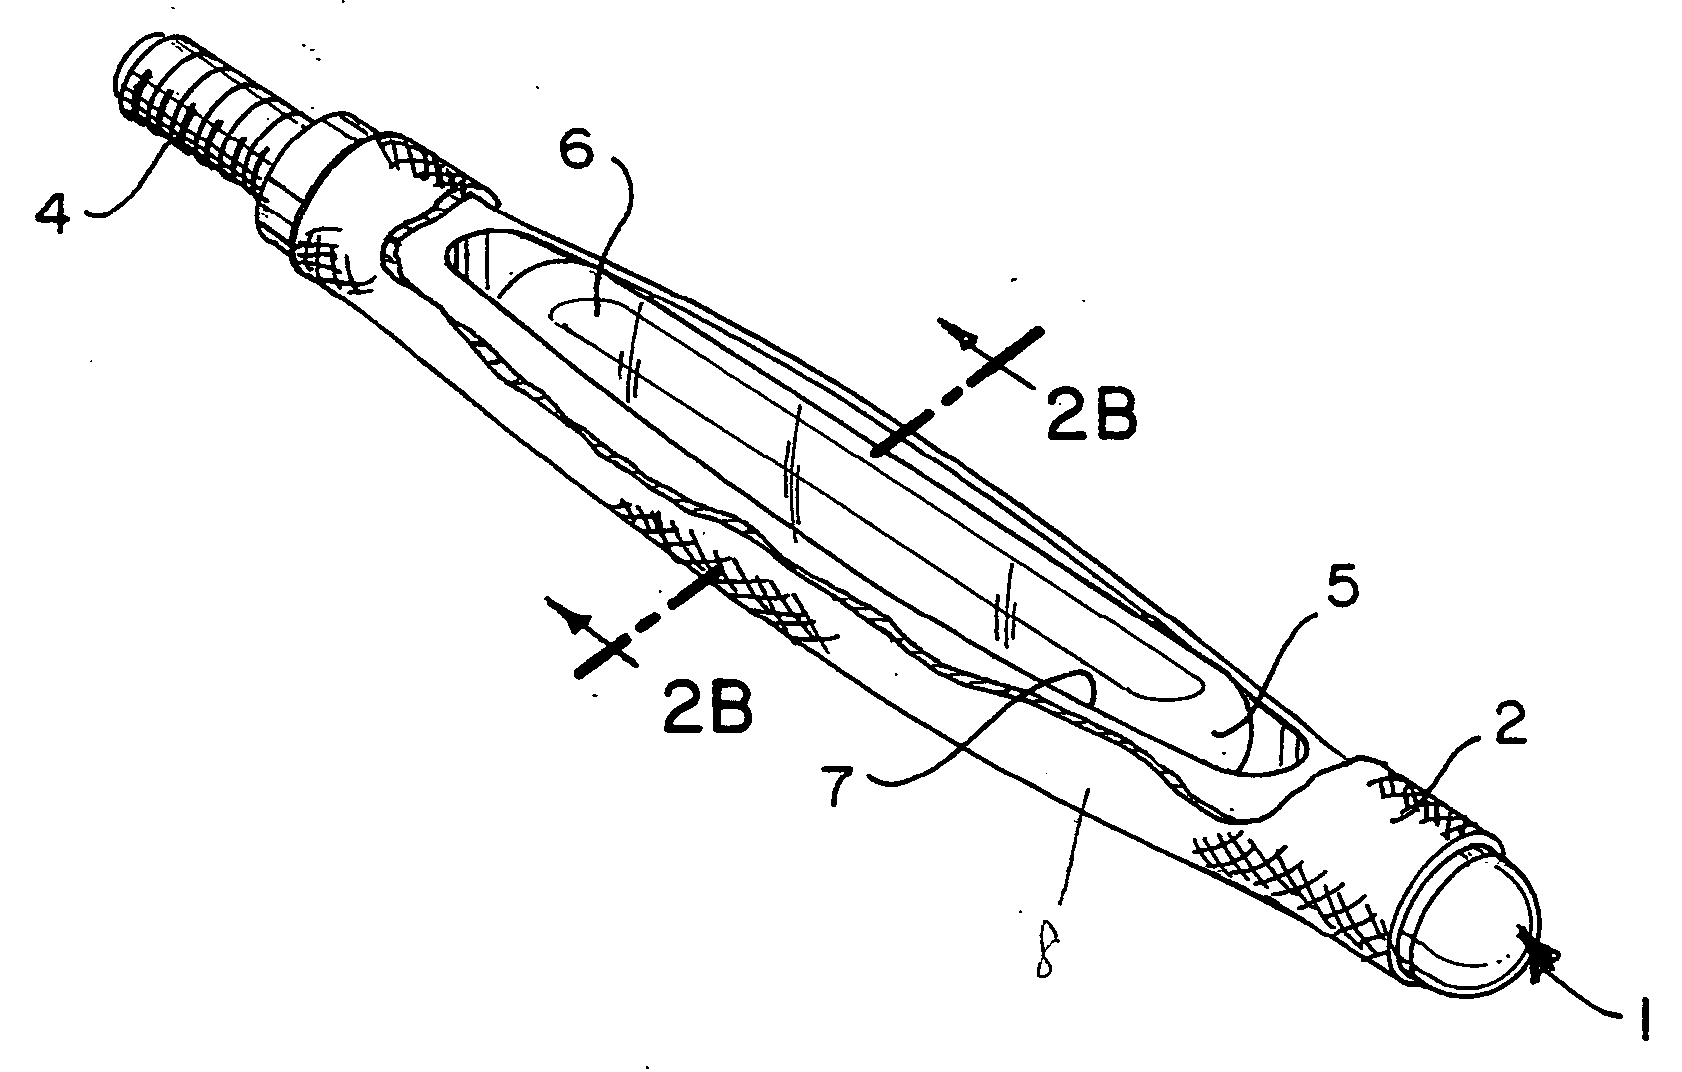 Disposable gun barrel cleaning device